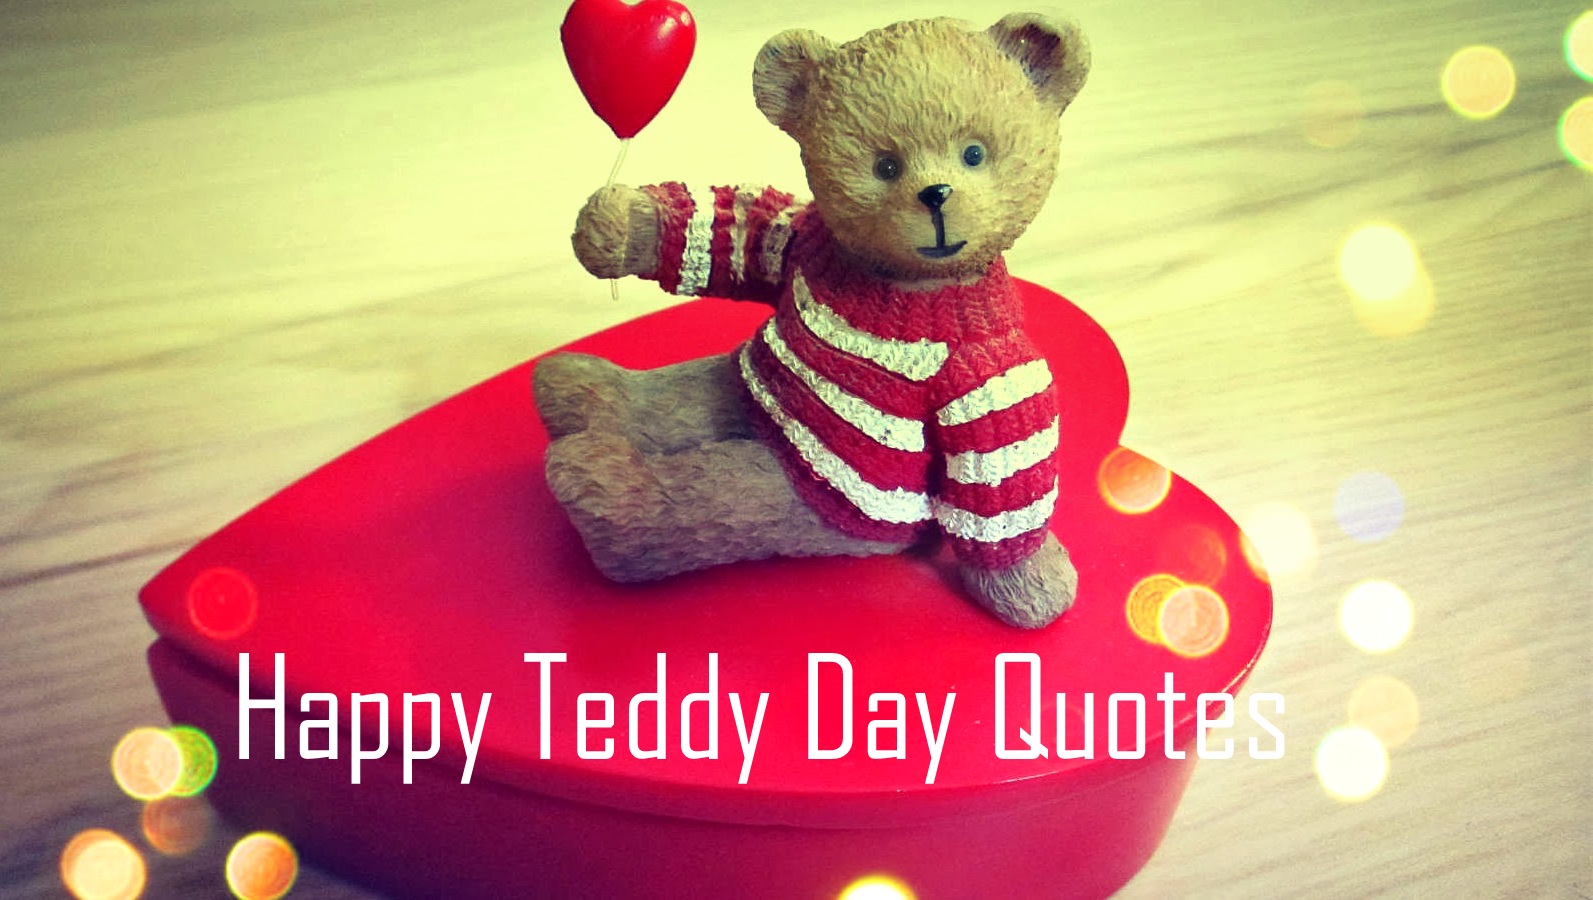 Teddy Day Photos - Teddy Hd Images Free Download - HD Wallpaper 